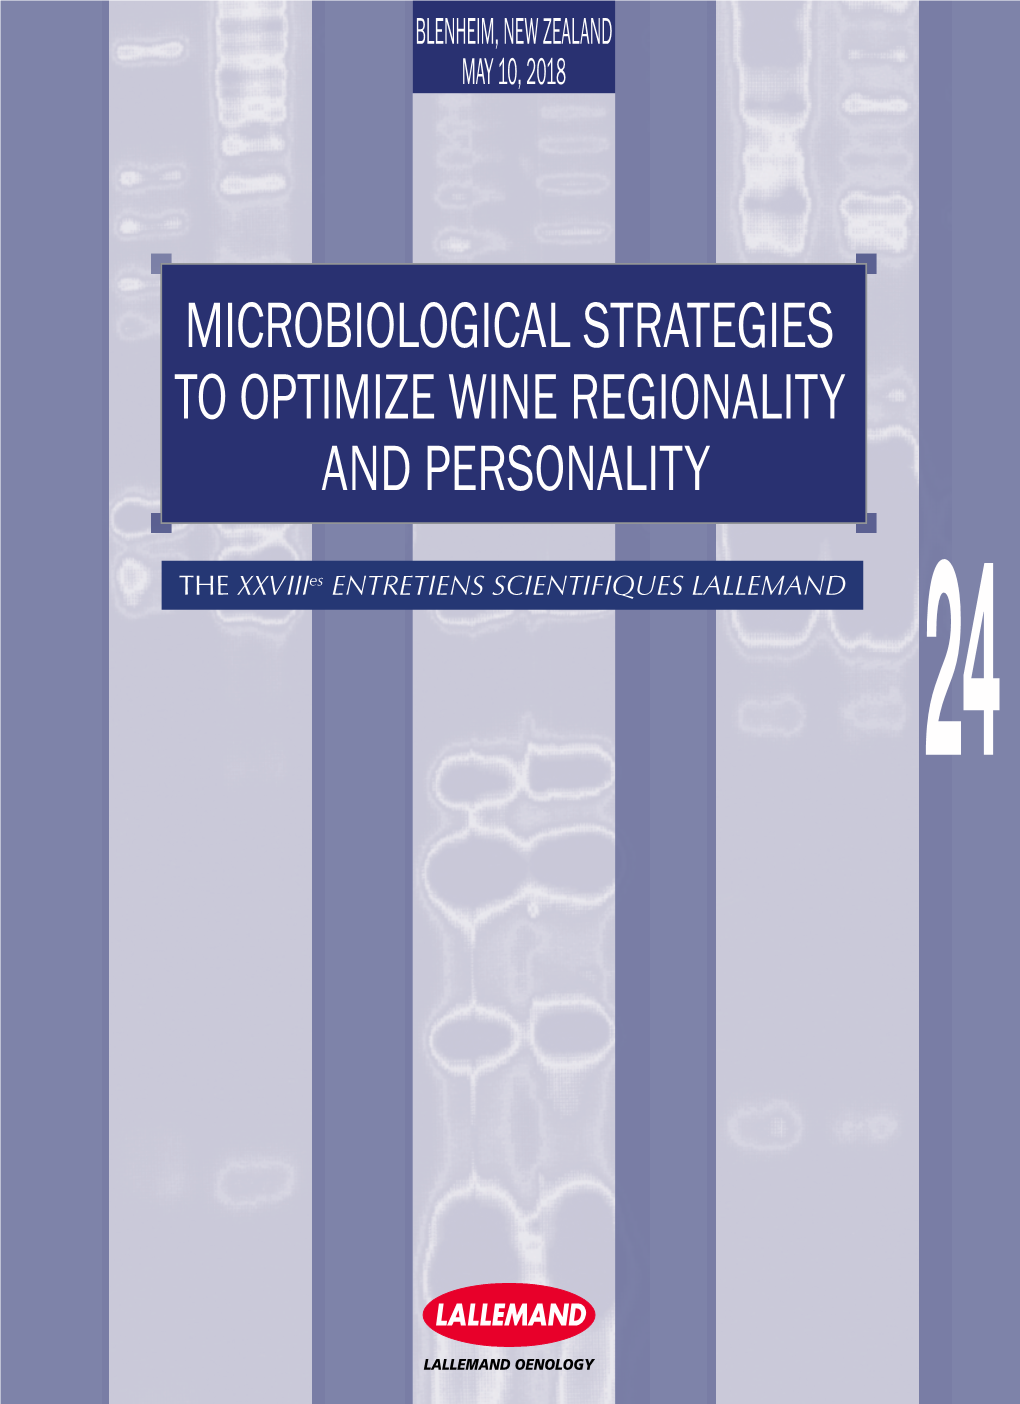 Microbiological Strategies to Optimize Wine Regionality and Personality